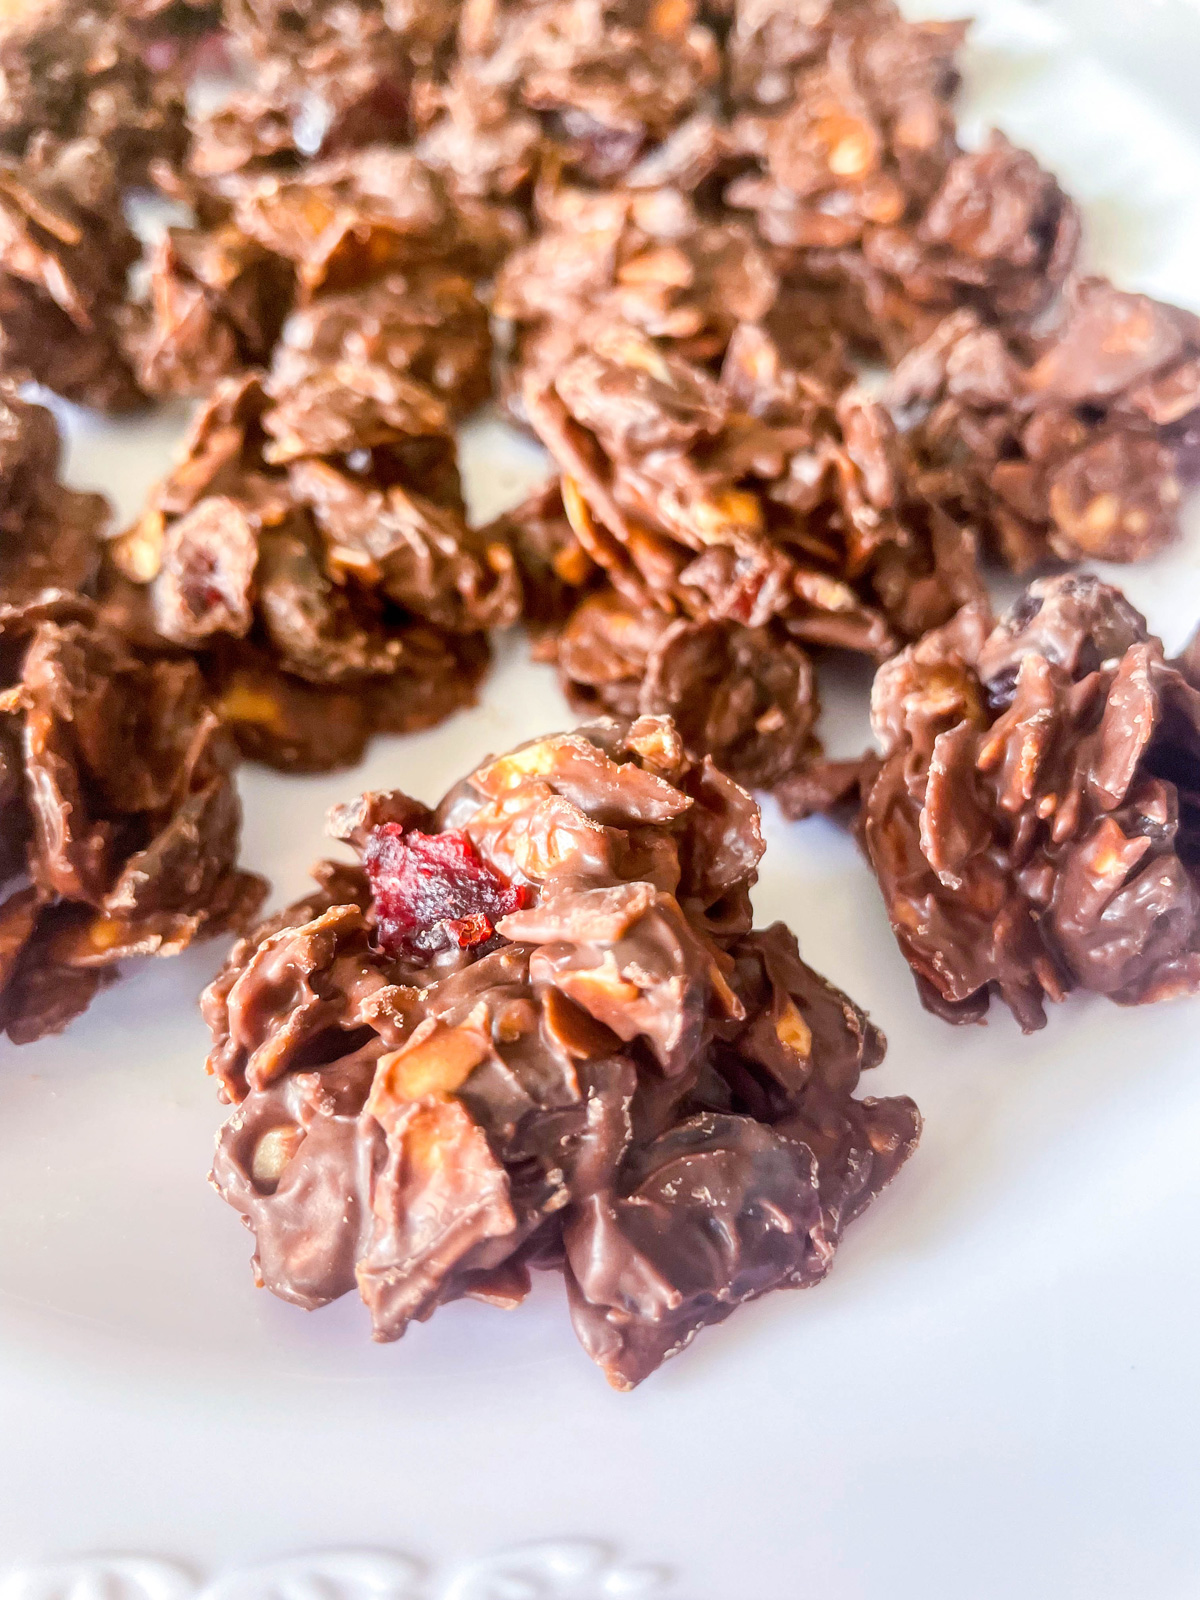 Chocolate Almond Cranberry Clusters